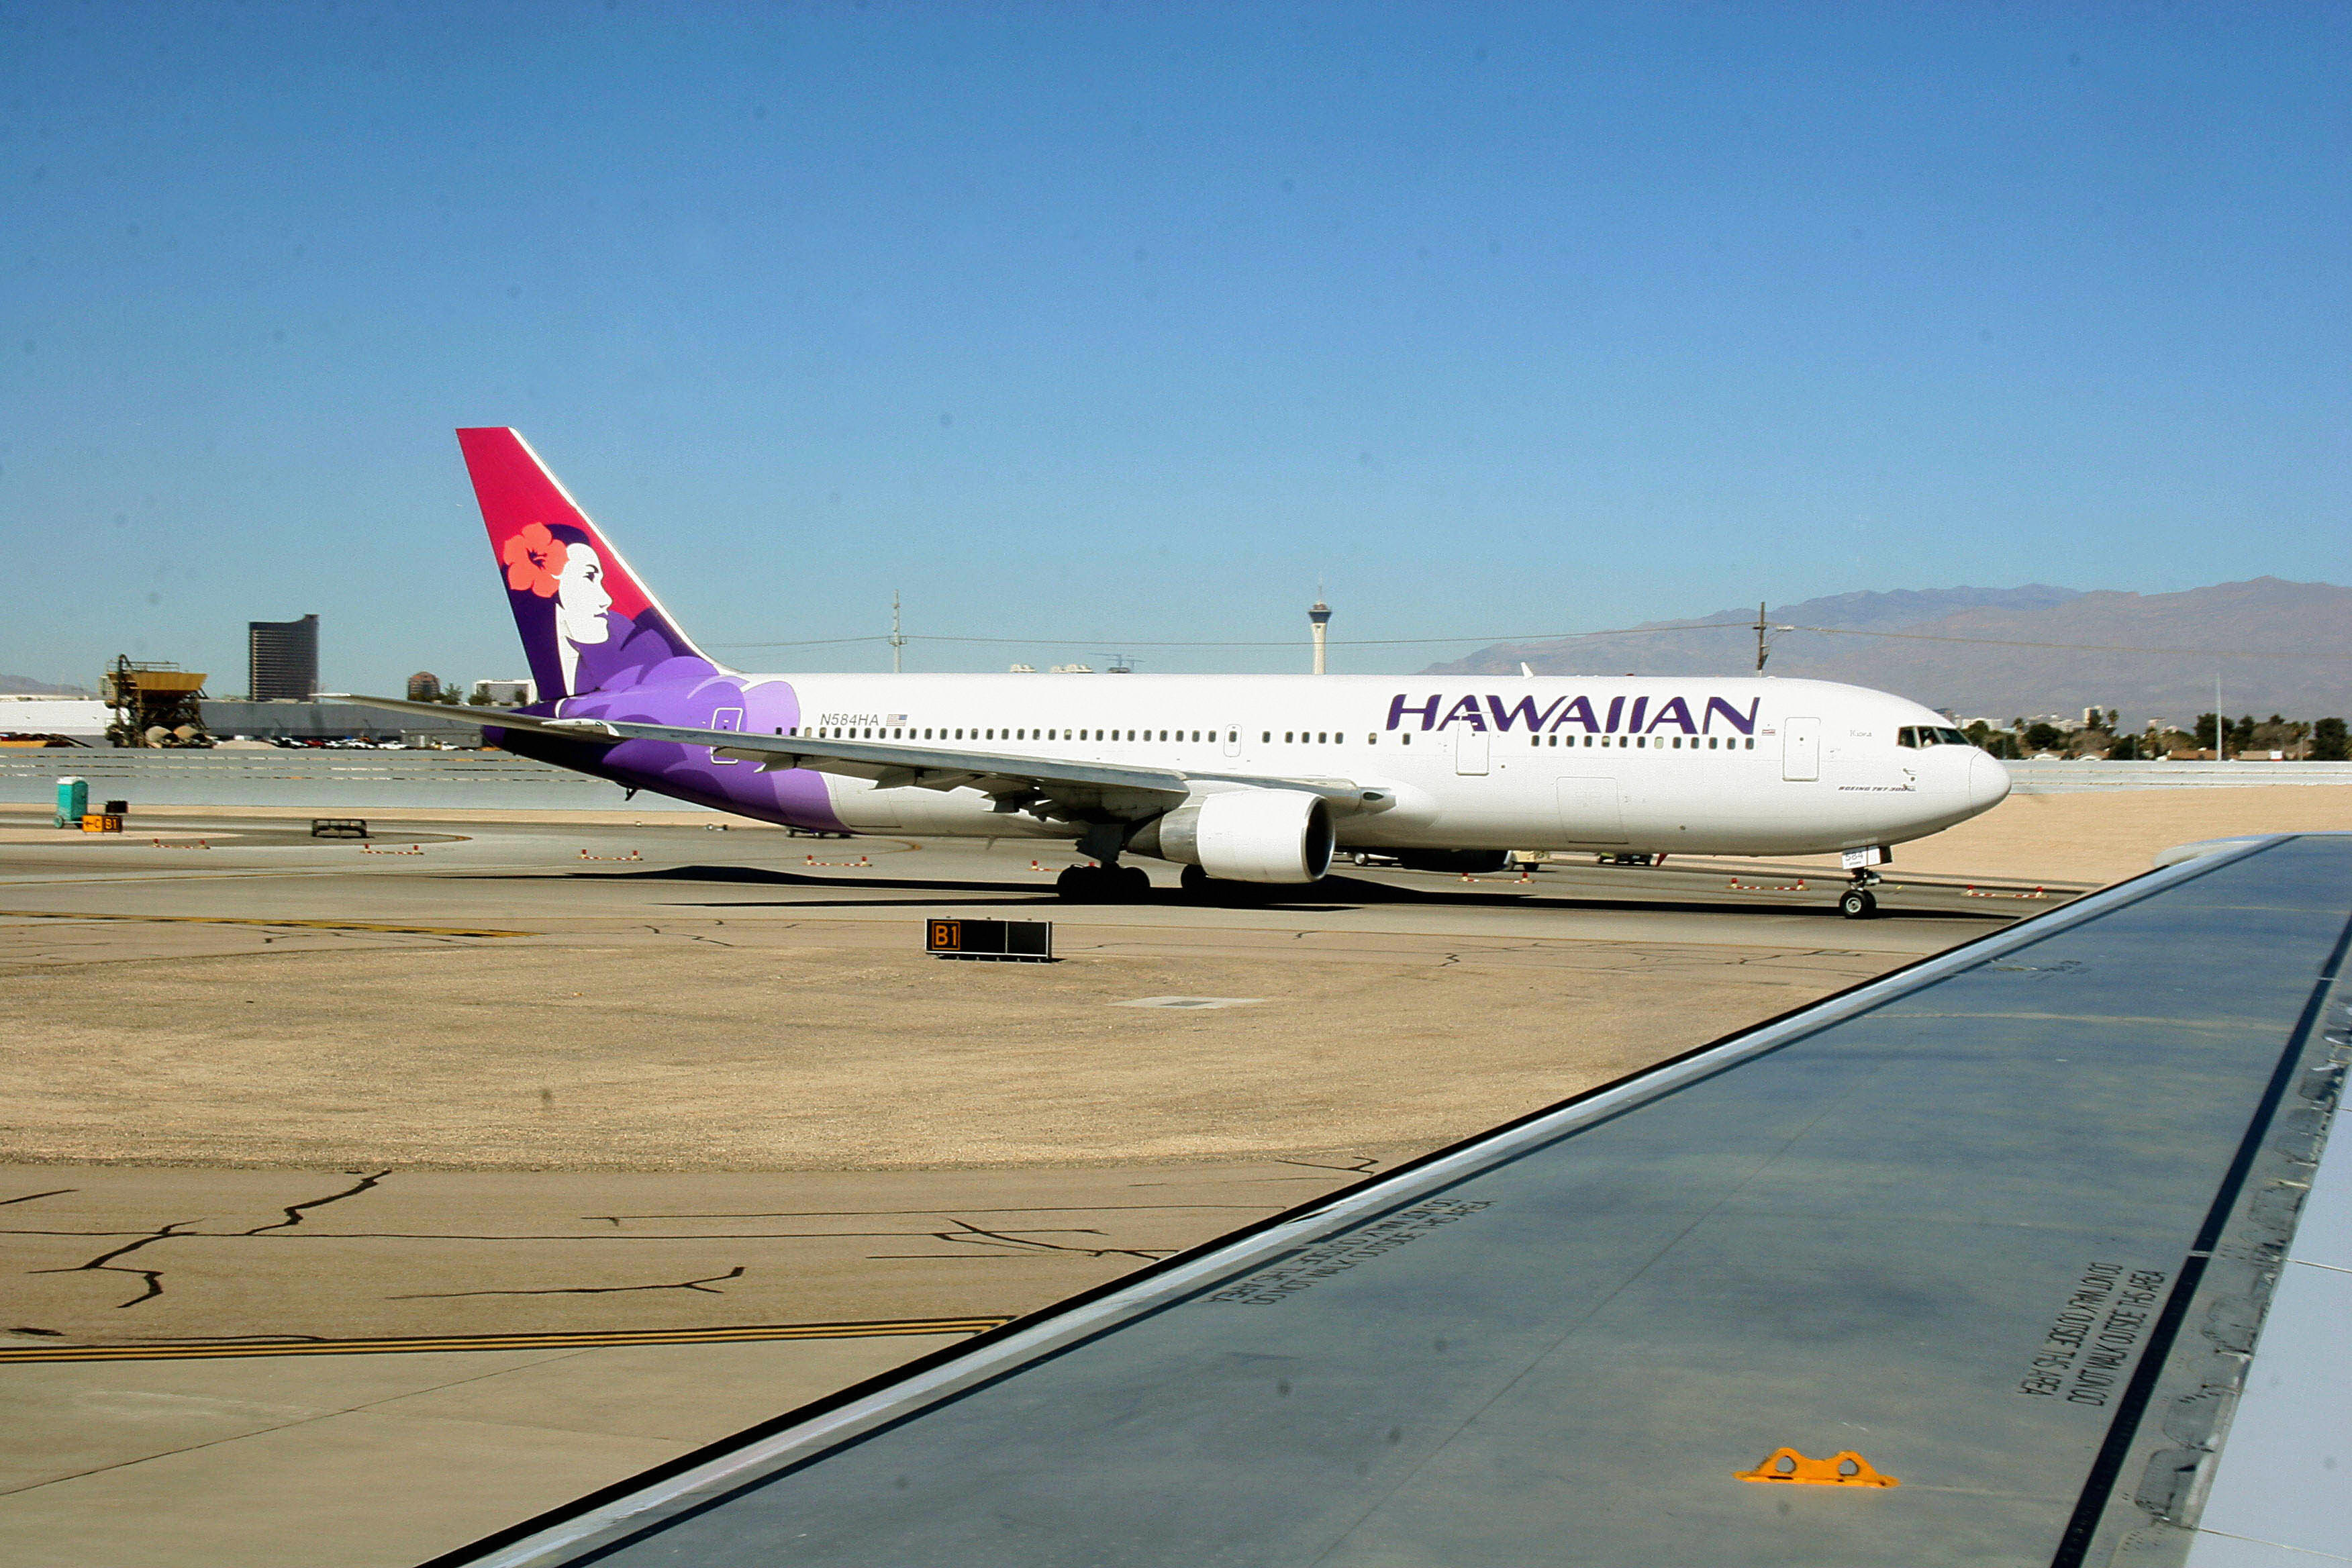 Hawaiian Airlines plane diverts to Los Angeles over blanket incident - CBS News